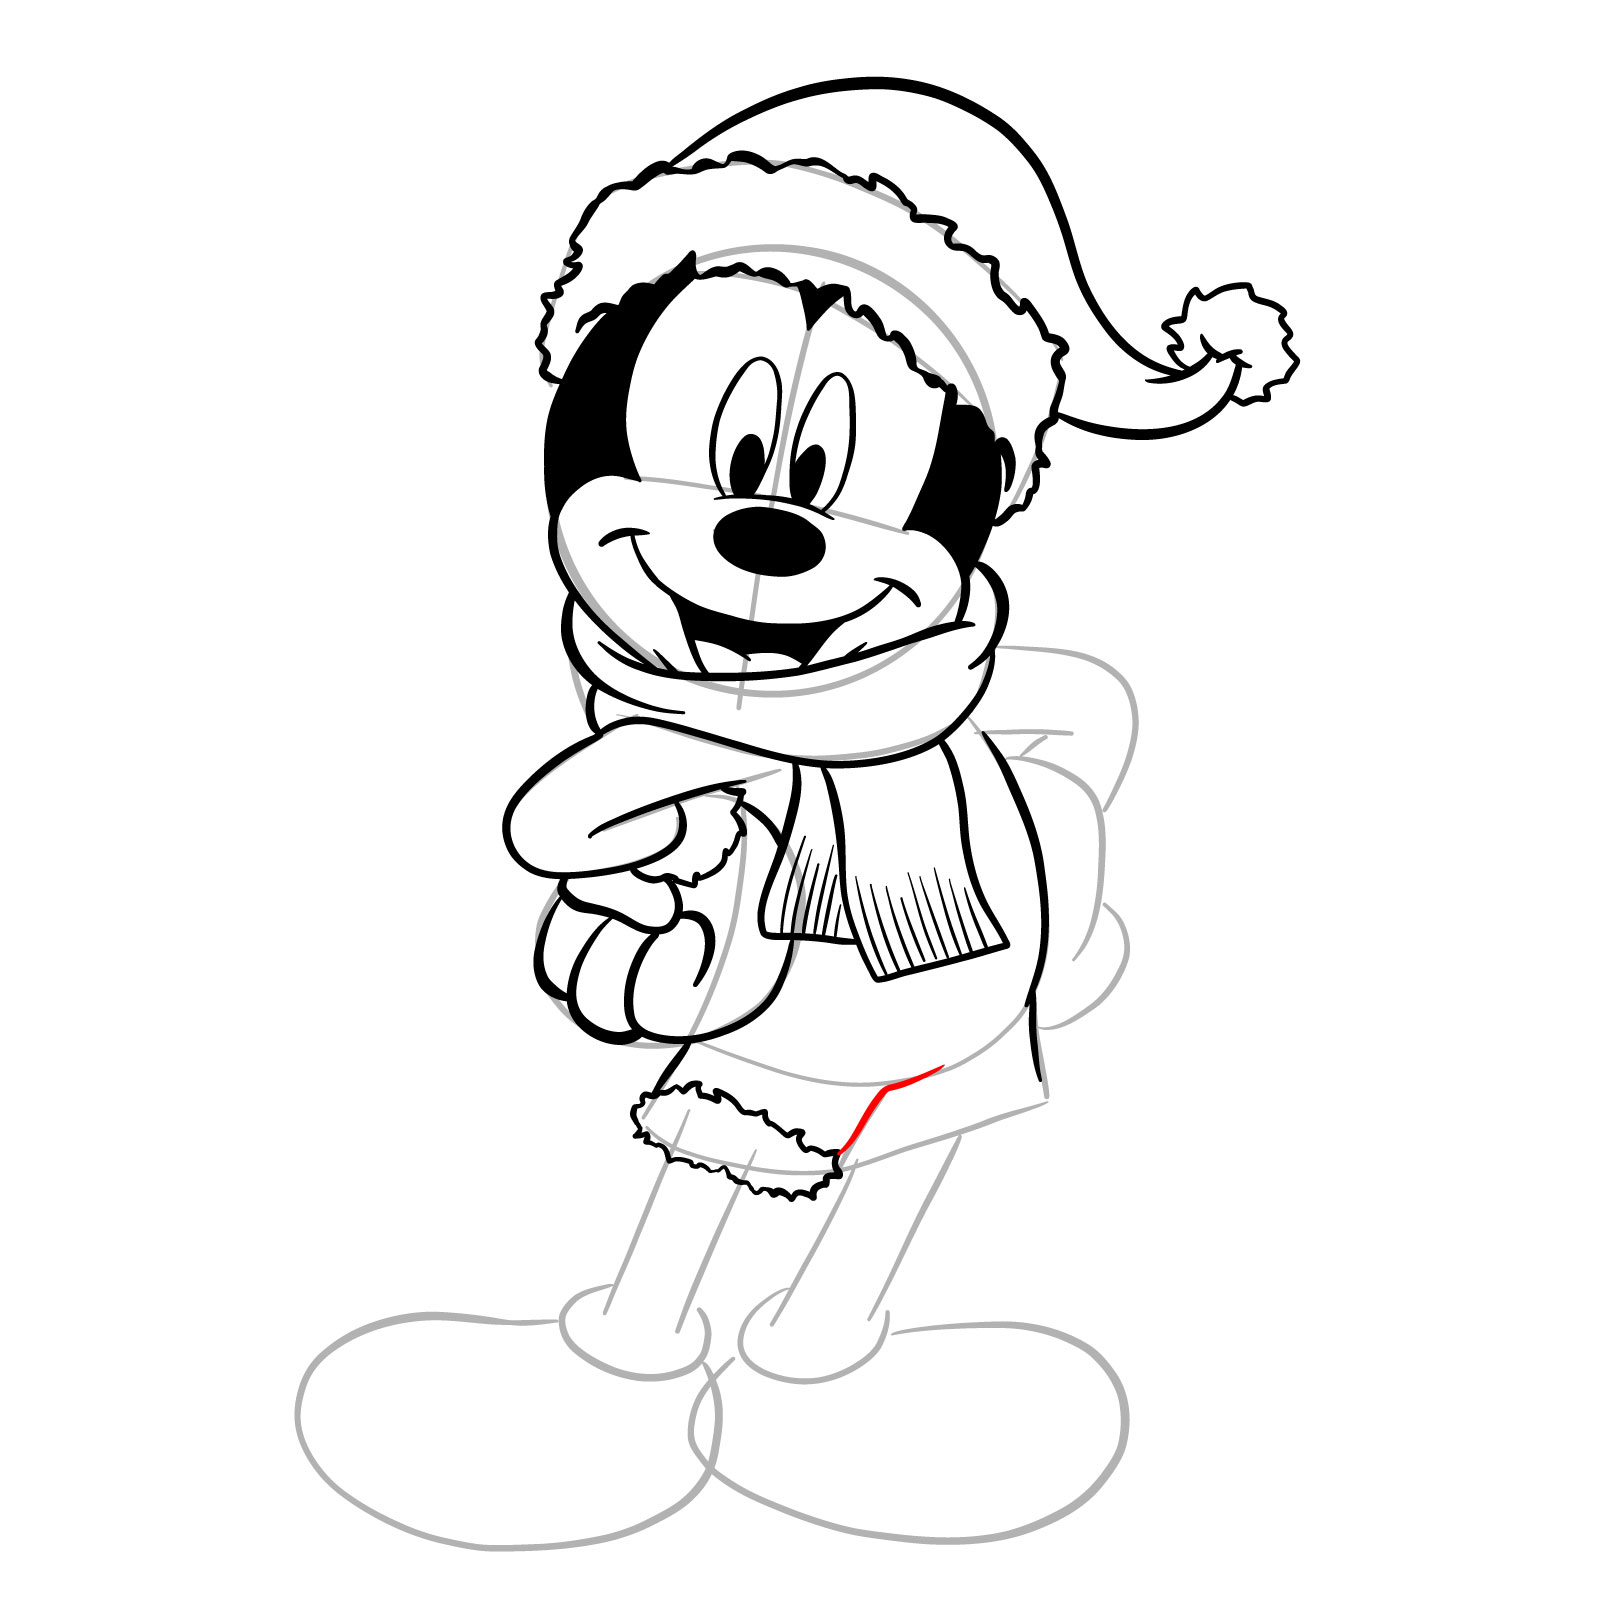 How to draw Santa Mickey Mouse - step 25